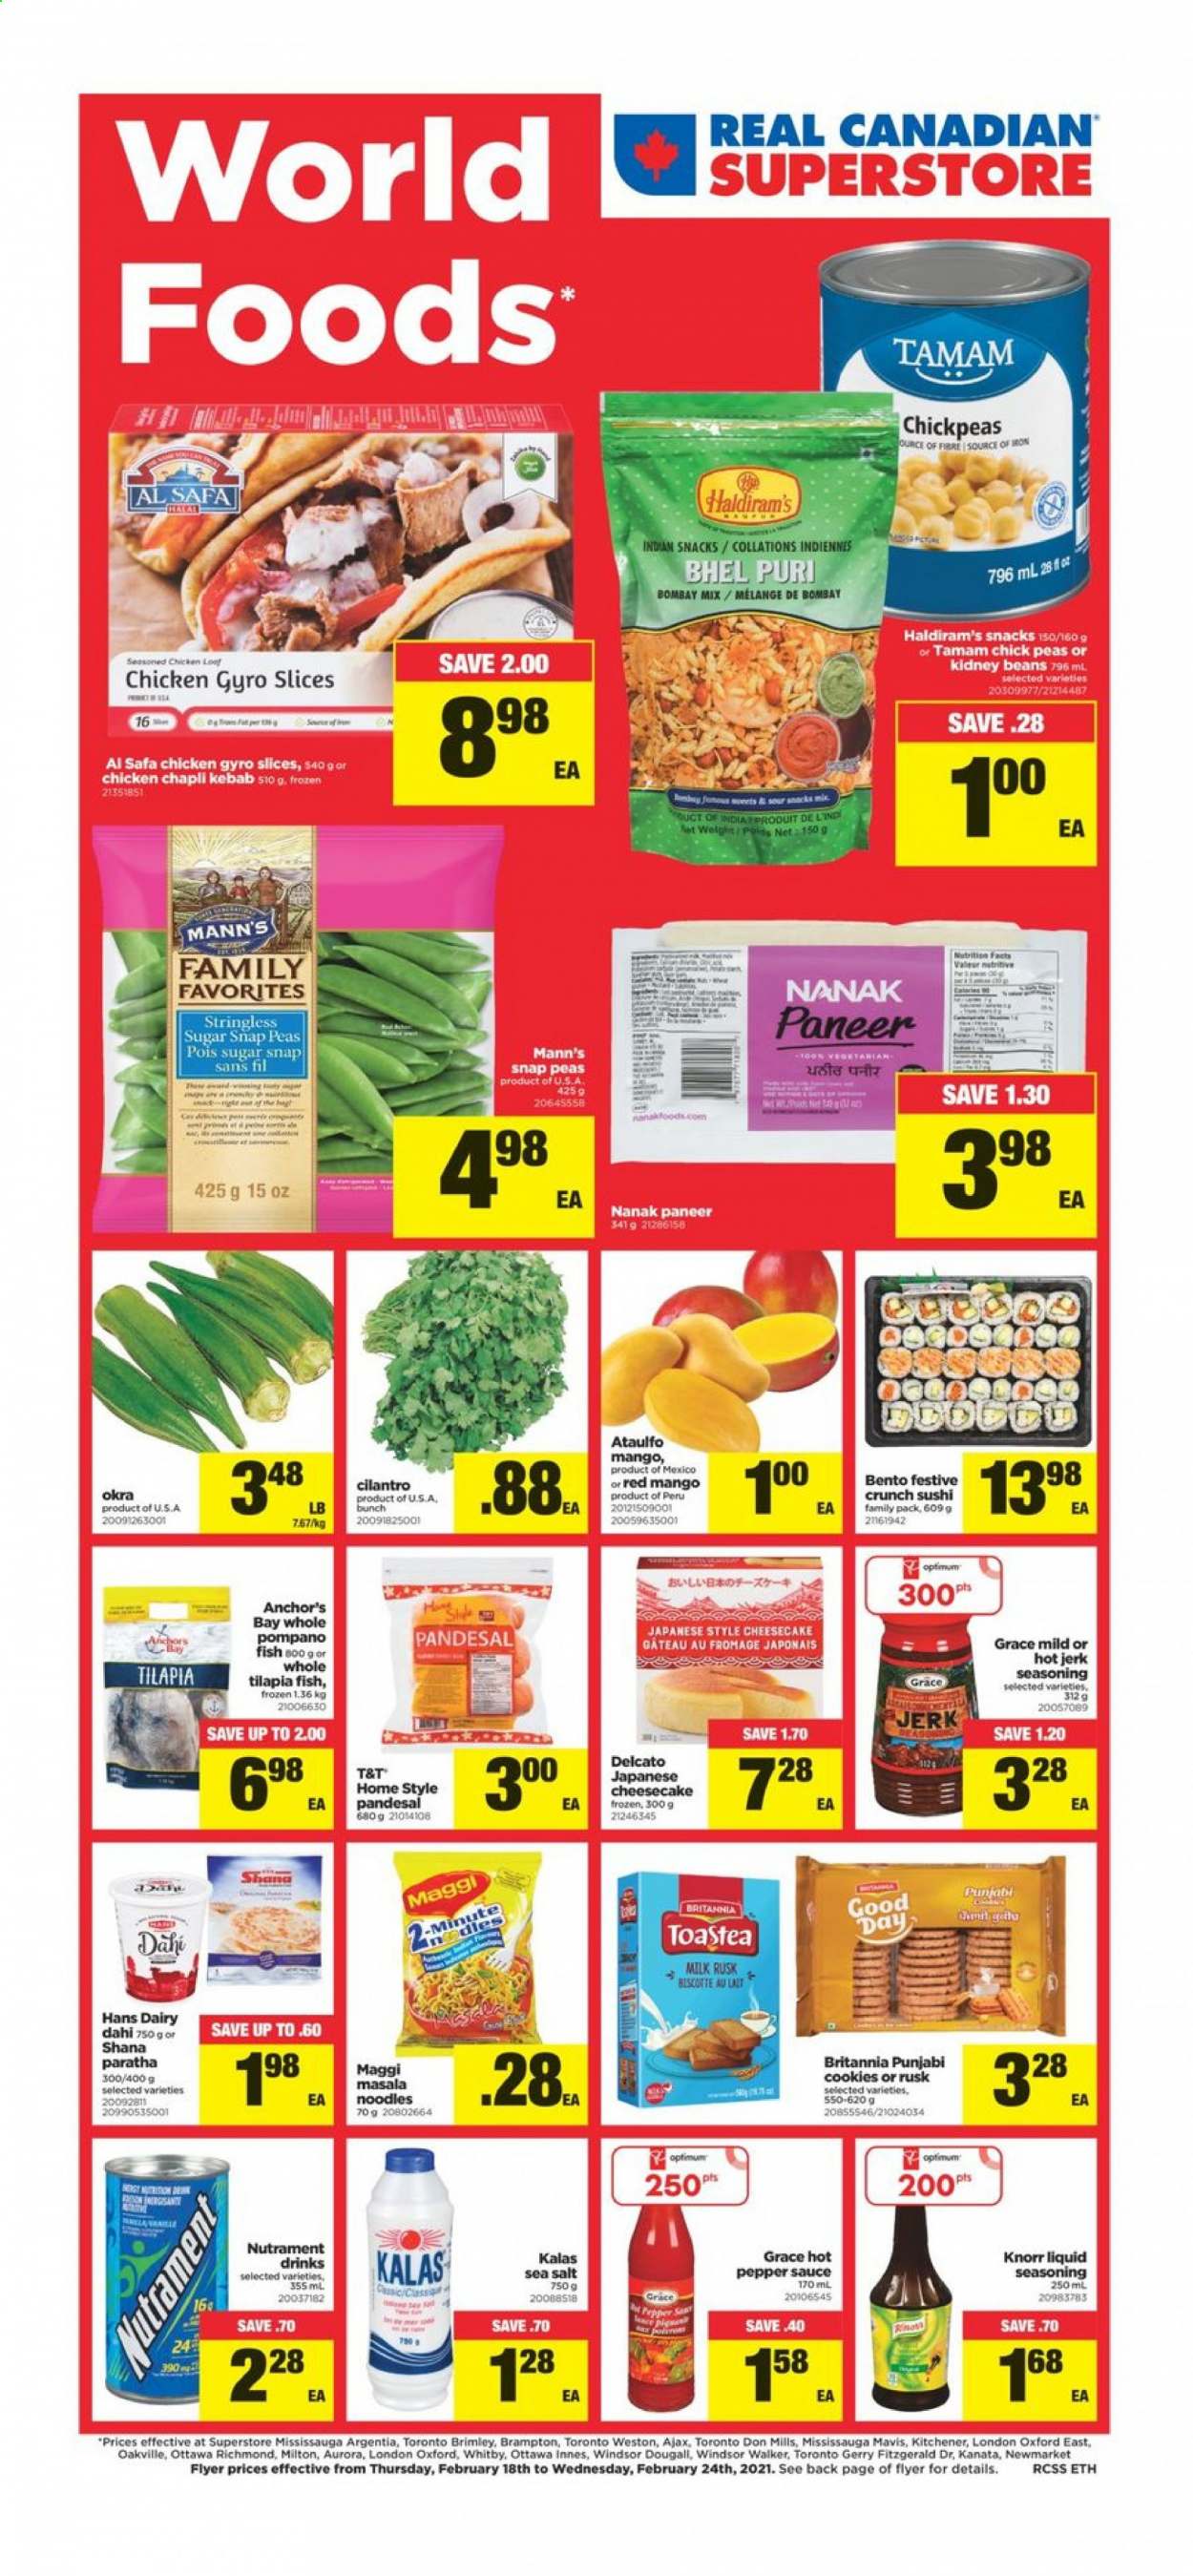 thumbnail - Real Canadian Superstore Flyer - February 18, 2021 - February 24, 2021 - Sales products - cheesecake, rusks, beans, peas, okra, mango, tilapia, pompano, fish, sauce, noodles, paneer, milk, Anchor, snap peas, cookies, snack, Maggi, sea salt, kidney beans, chickpeas, cilantro, pepper, spice, Ron Pelicano, Ajax, Optimum, Knorr. Page 1.